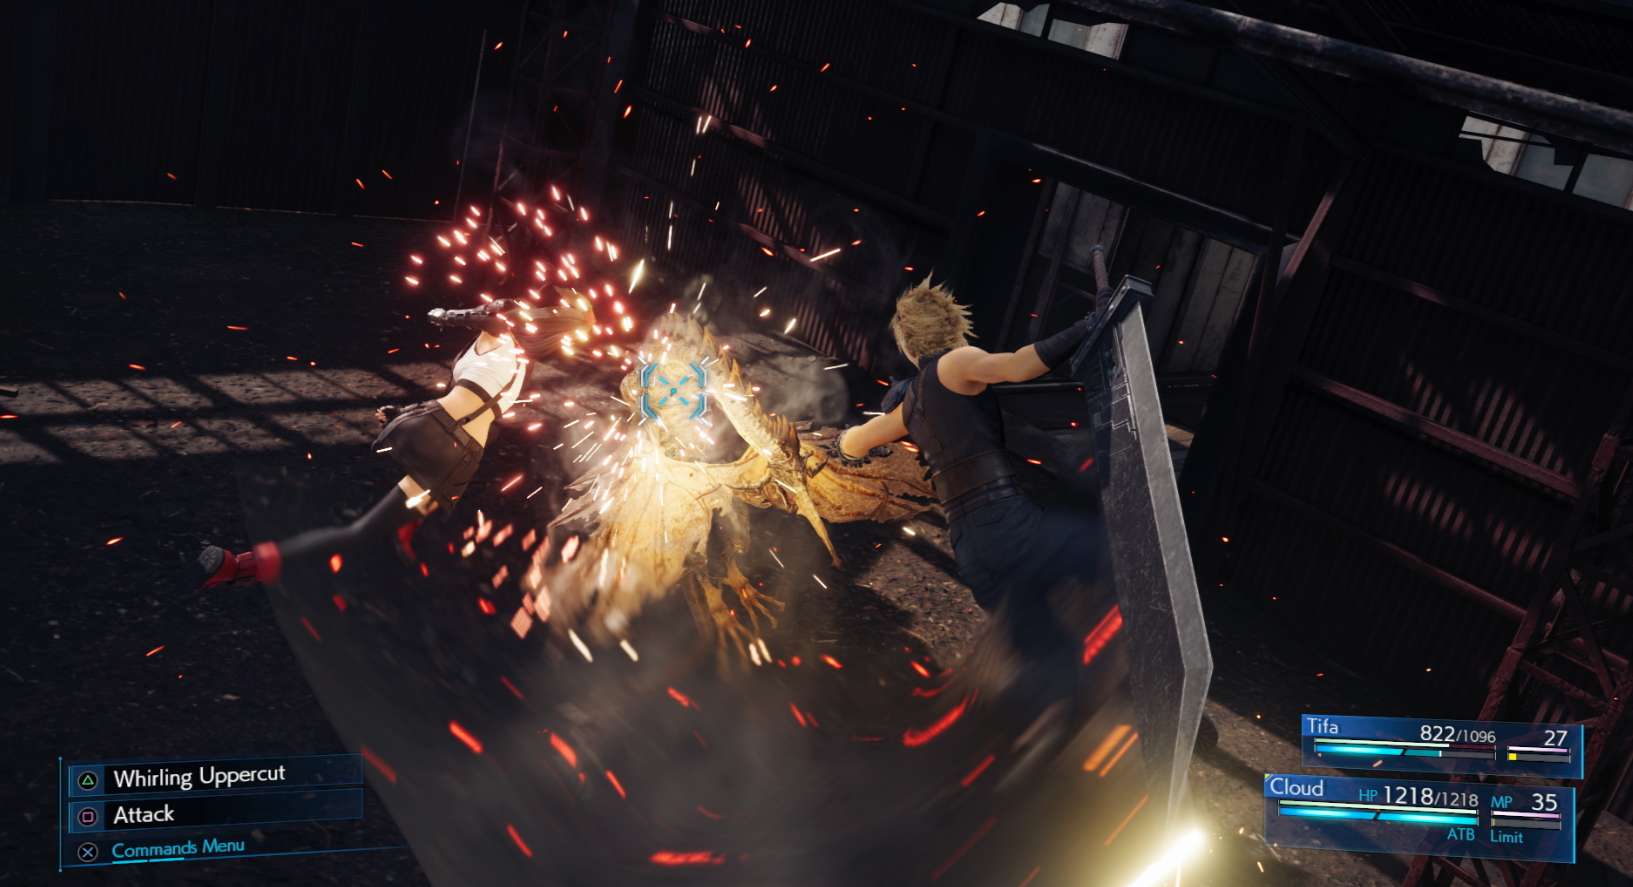 The Side Missions For Final Fantasy VII Remake Will Have The Same Quality Level As The Main Story, According To Game Developers